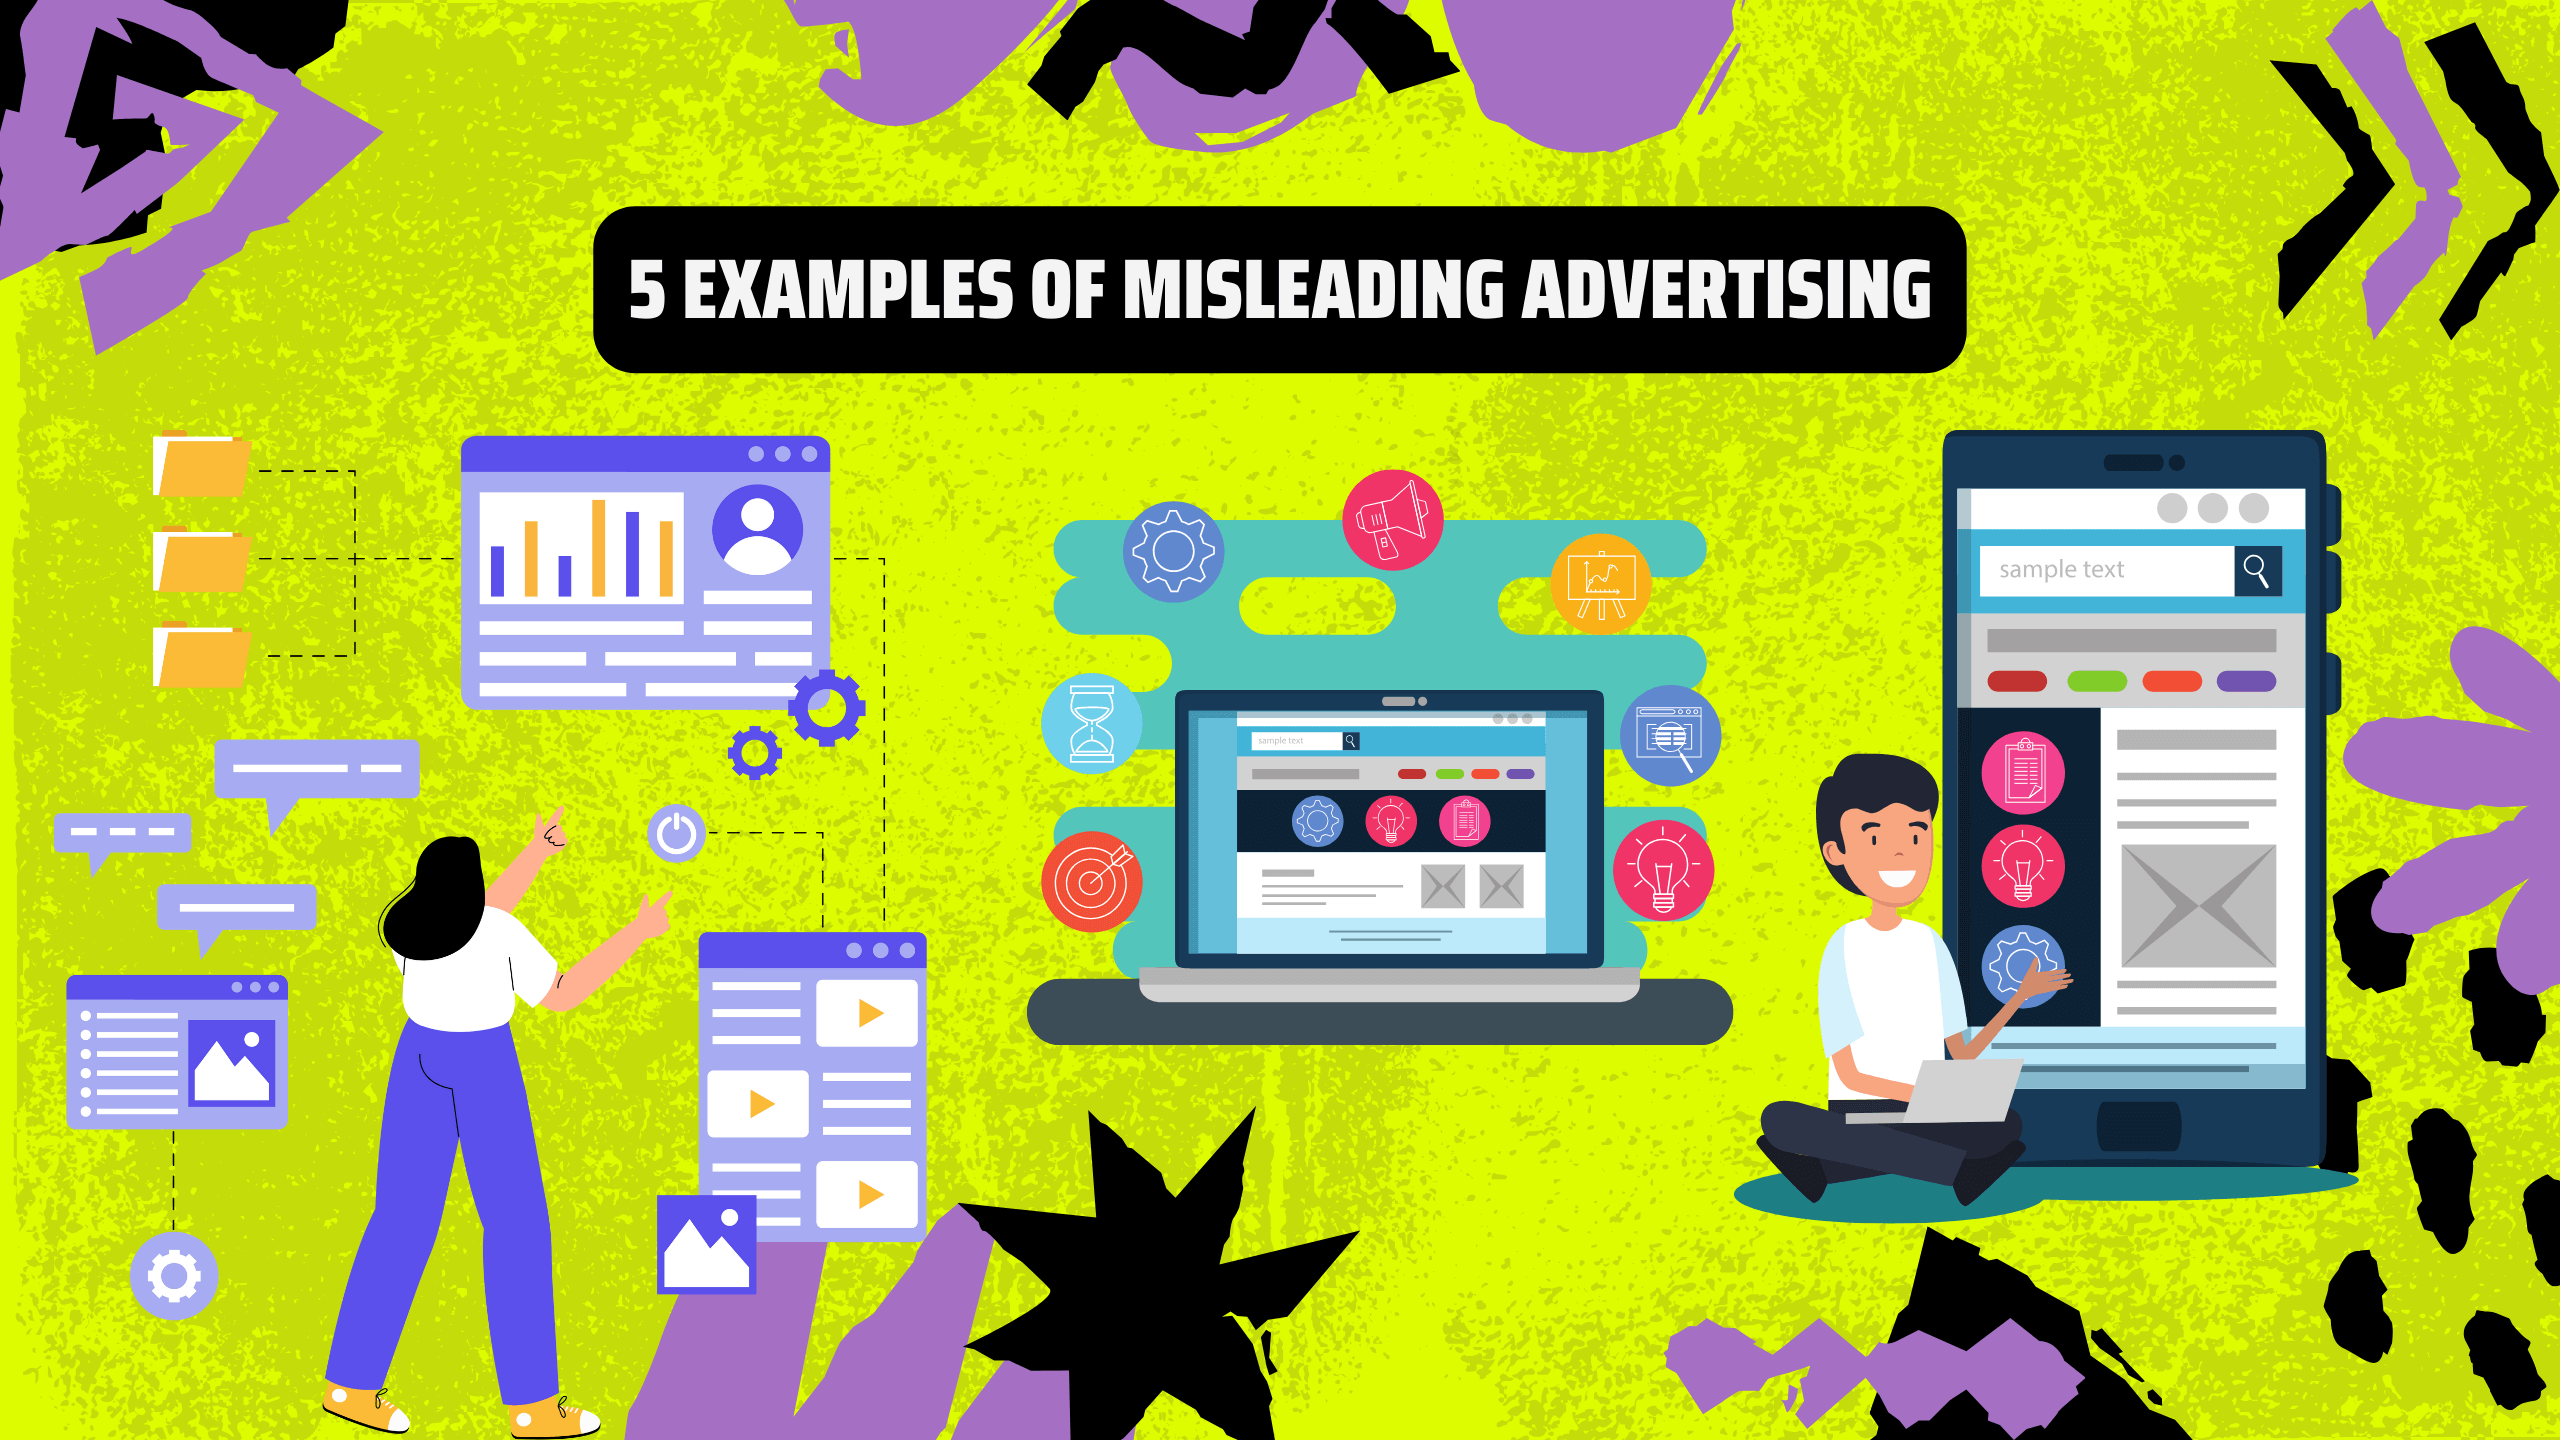 5 Examples of Misleading Advertising